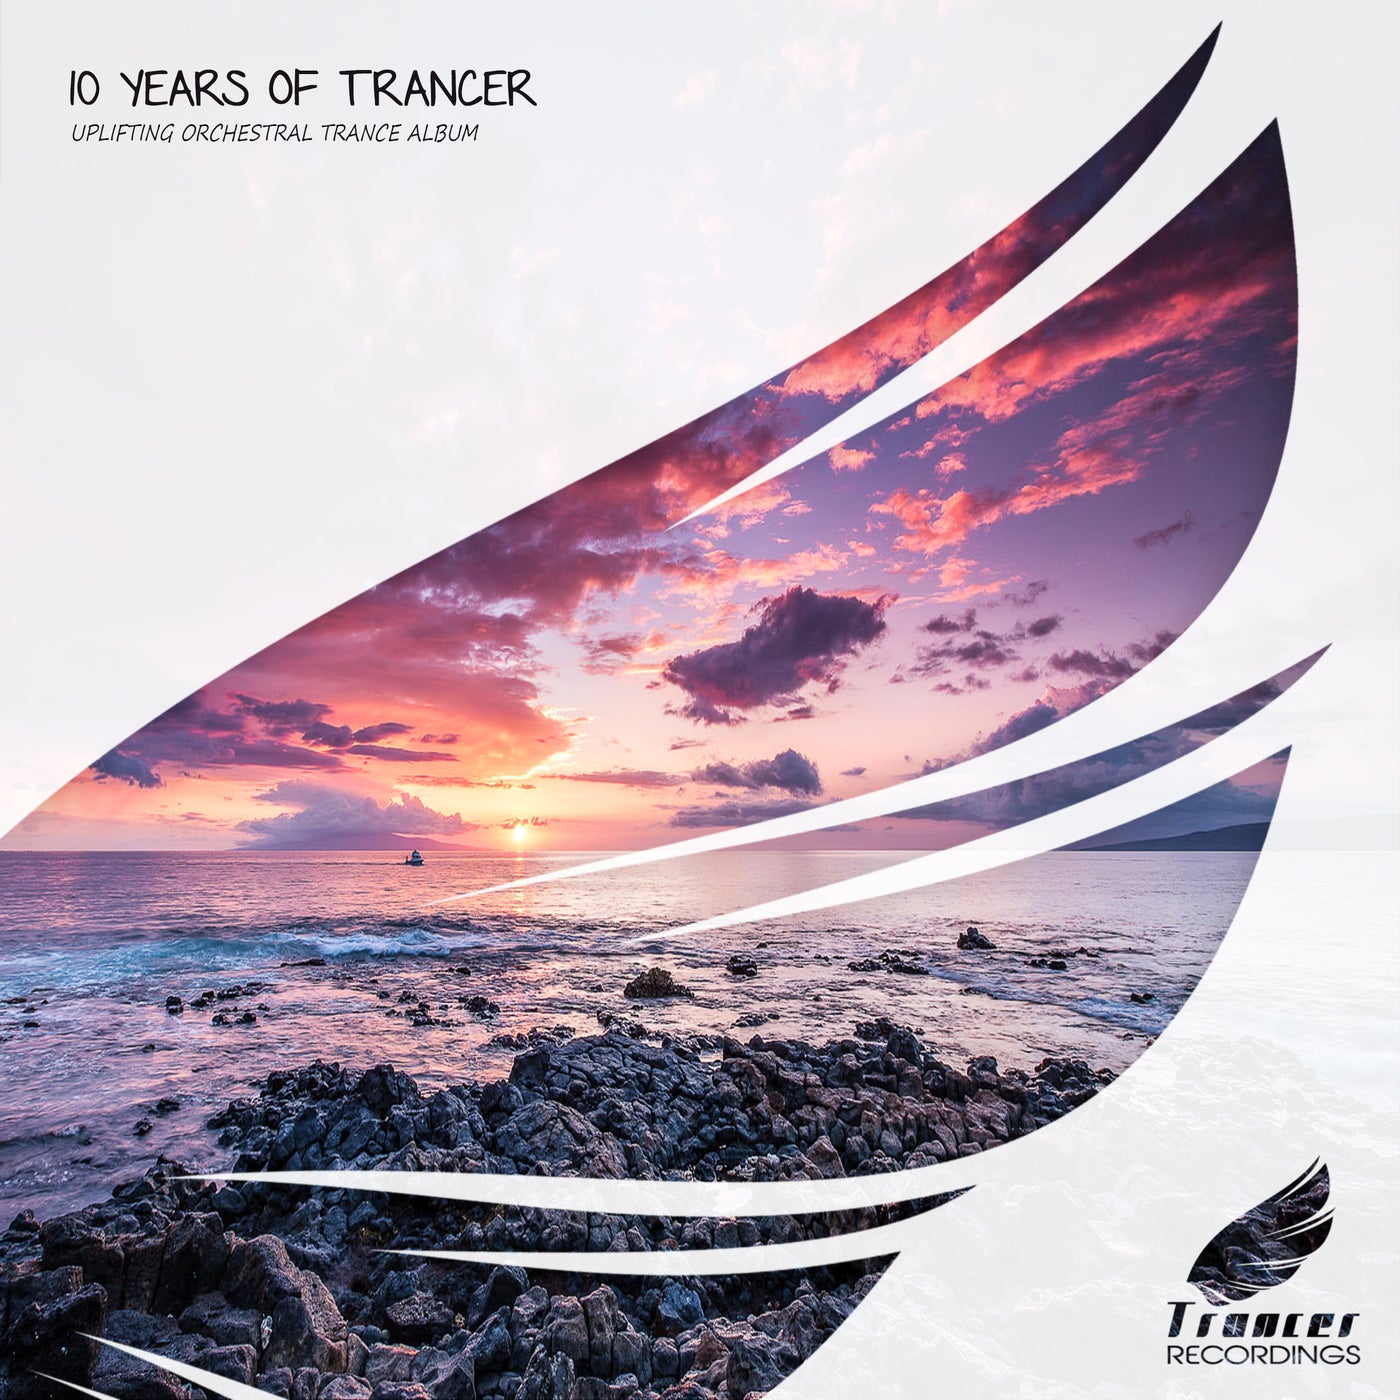 10 Years of Trancer